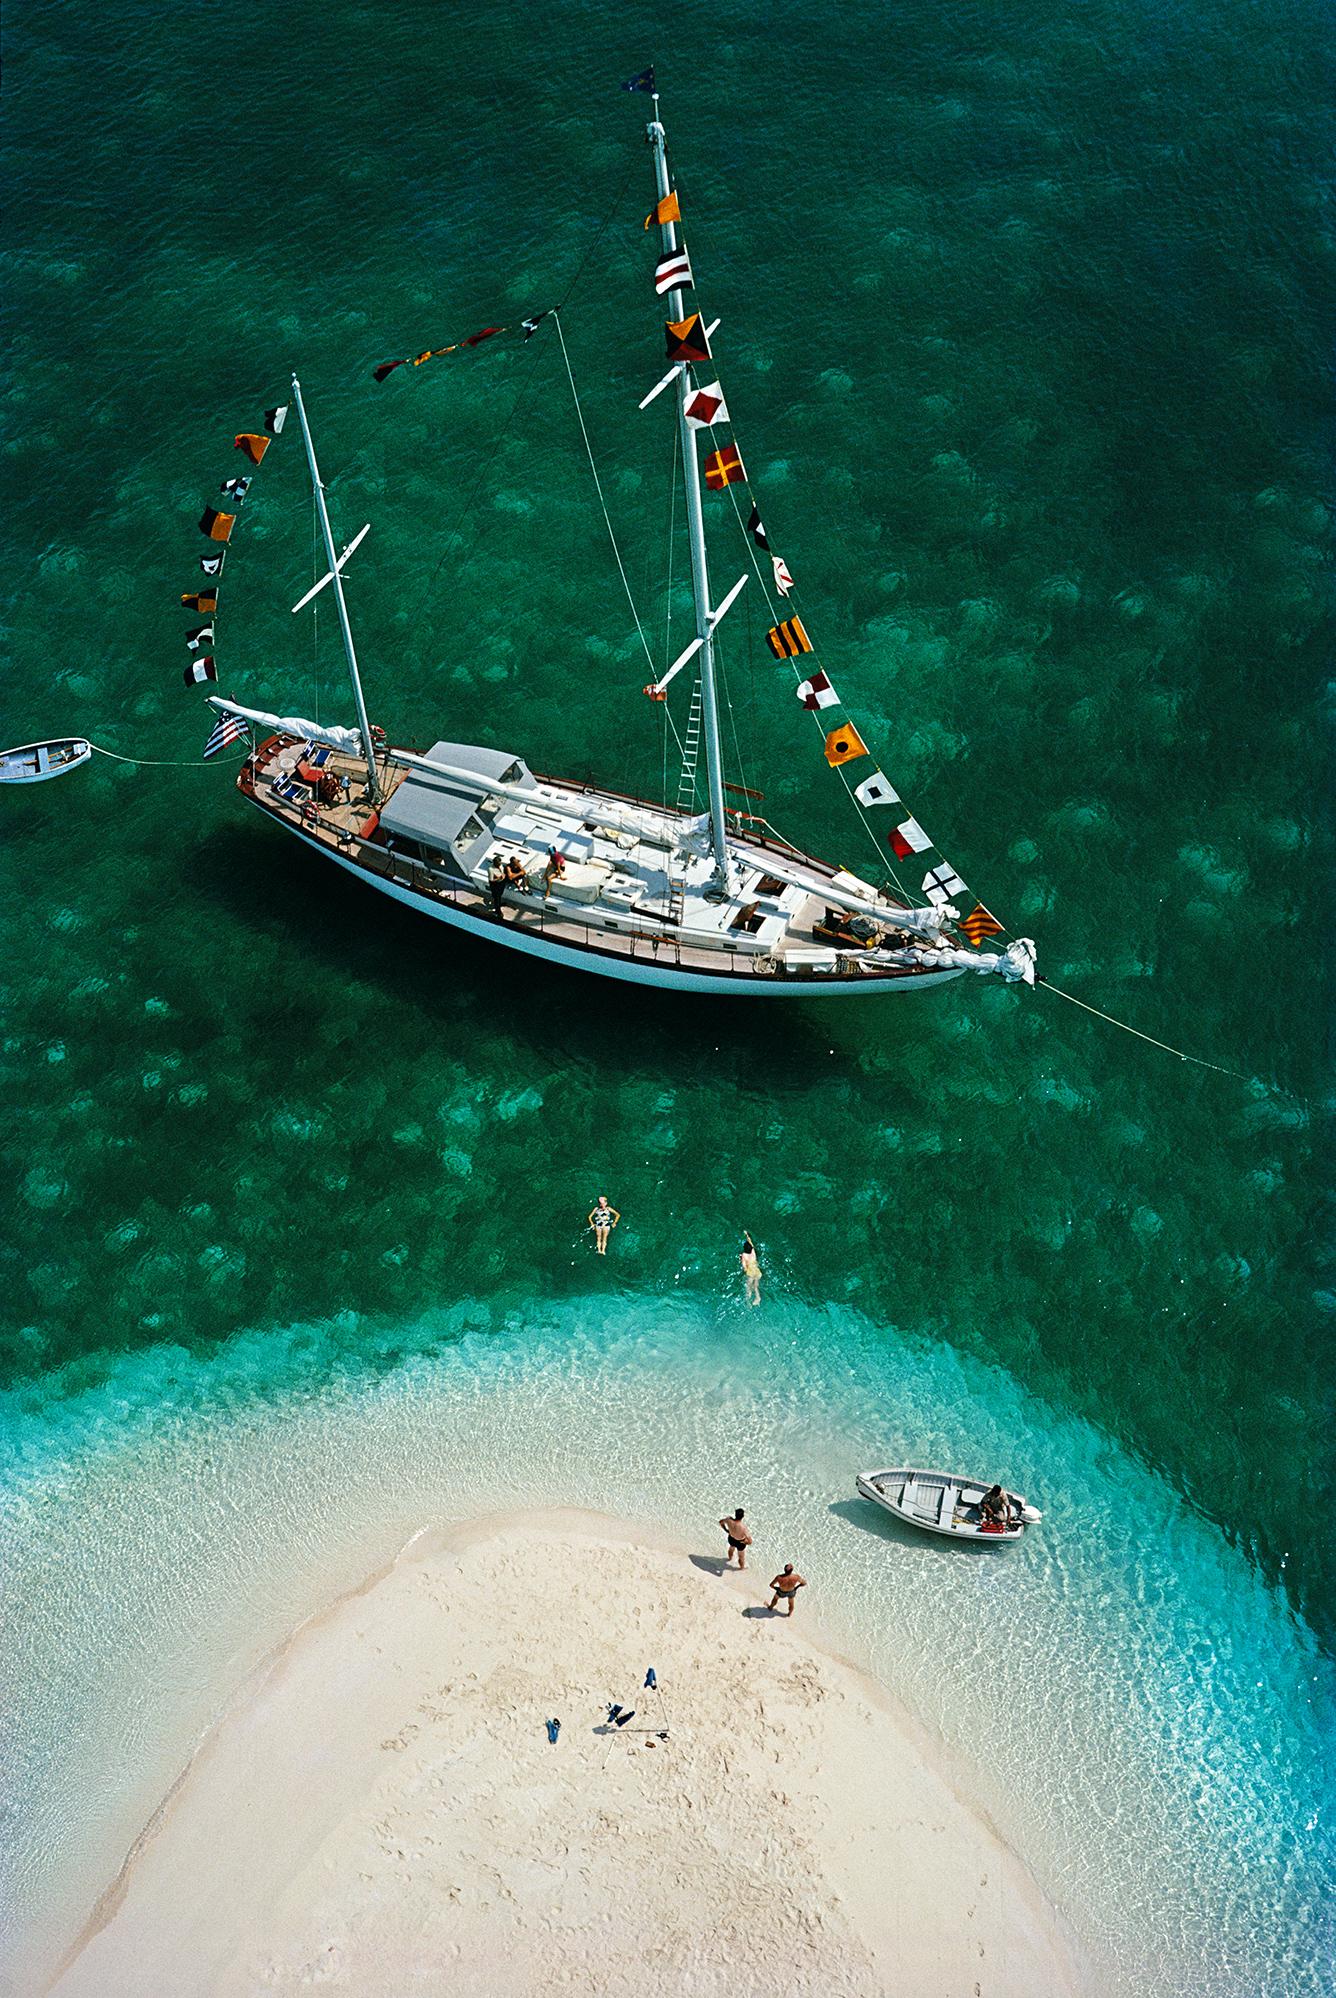 'Exuma Holiday' 1964 Slim Aarons Limited Estate Edition Print 

A yachting holiday on Exuma in the Bahamas, April 1964.

Produced from the original transparency
Certificate of authenticity supplied 
Archive stamped

Paper Size  24x20 inches / 60 x